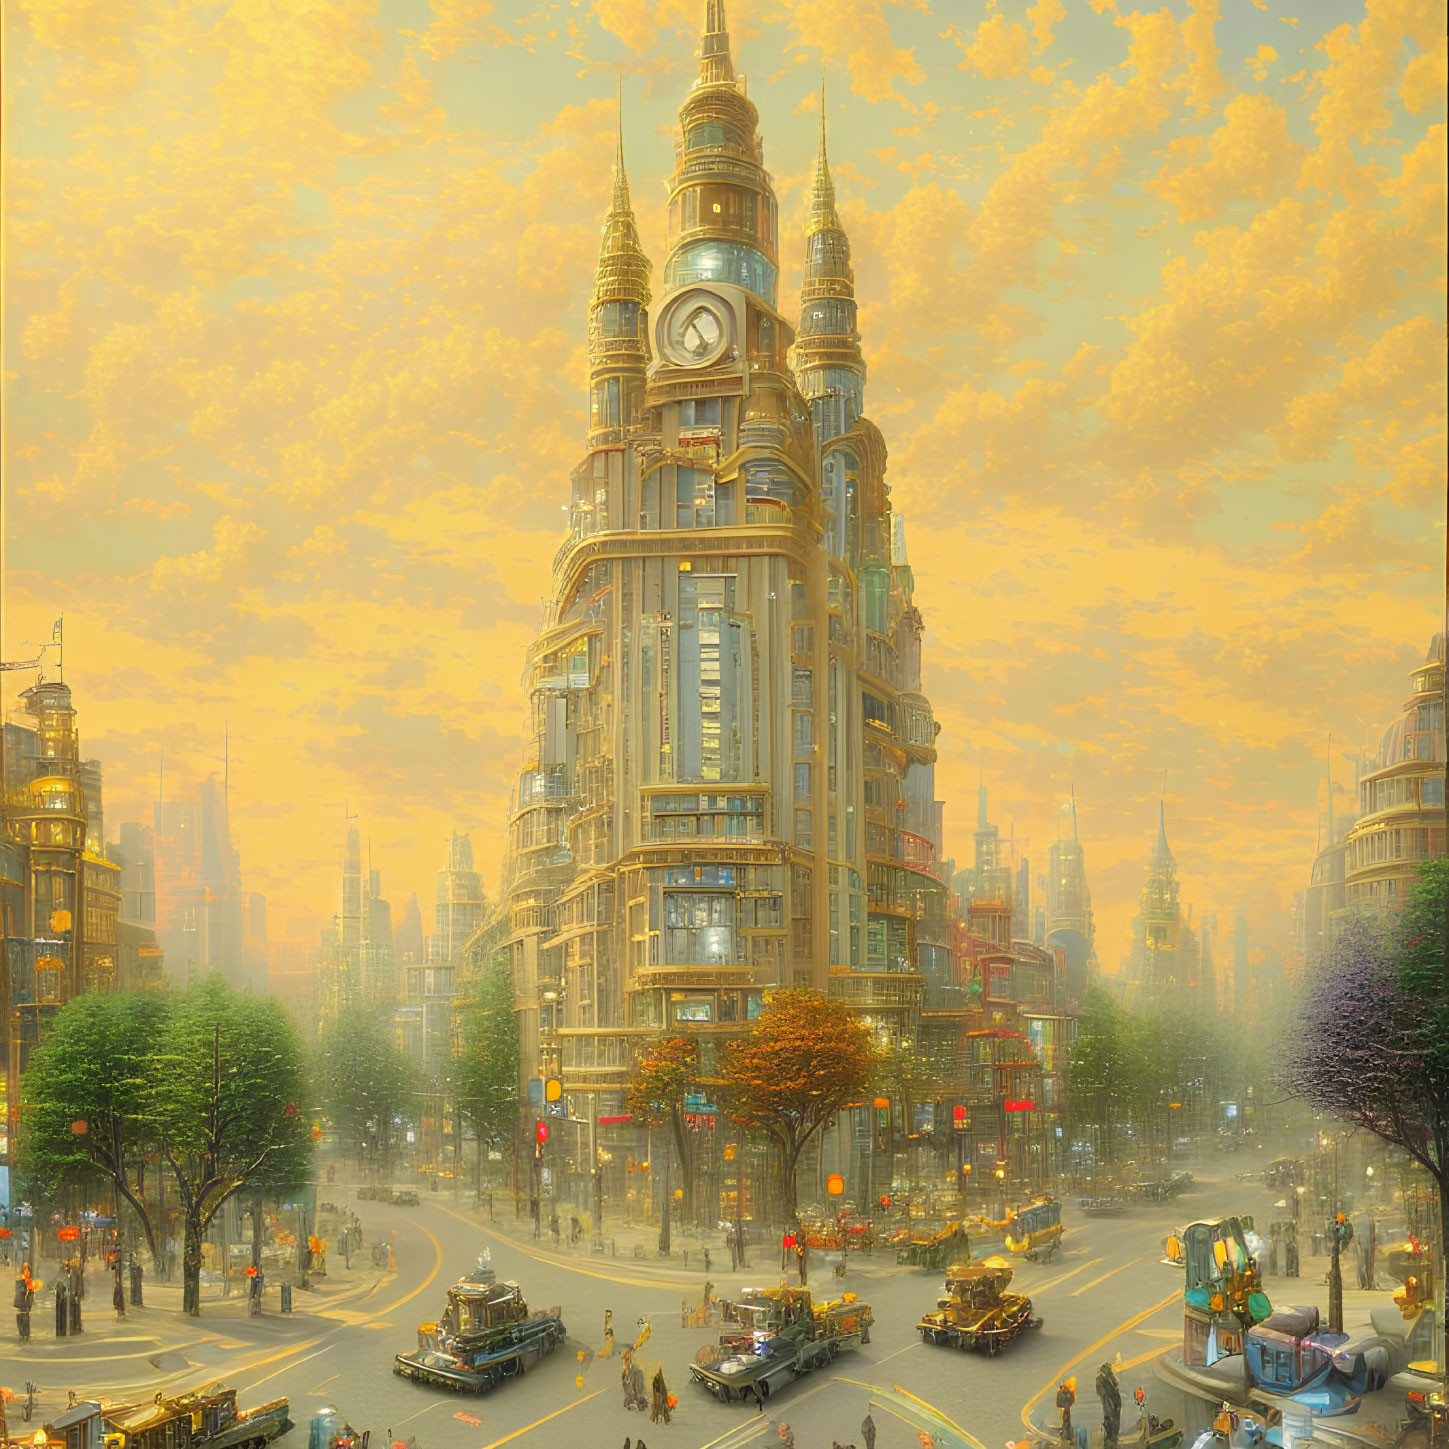 Ornate clock tower in sunlit cityscape with vintage vehicles and pedestrians